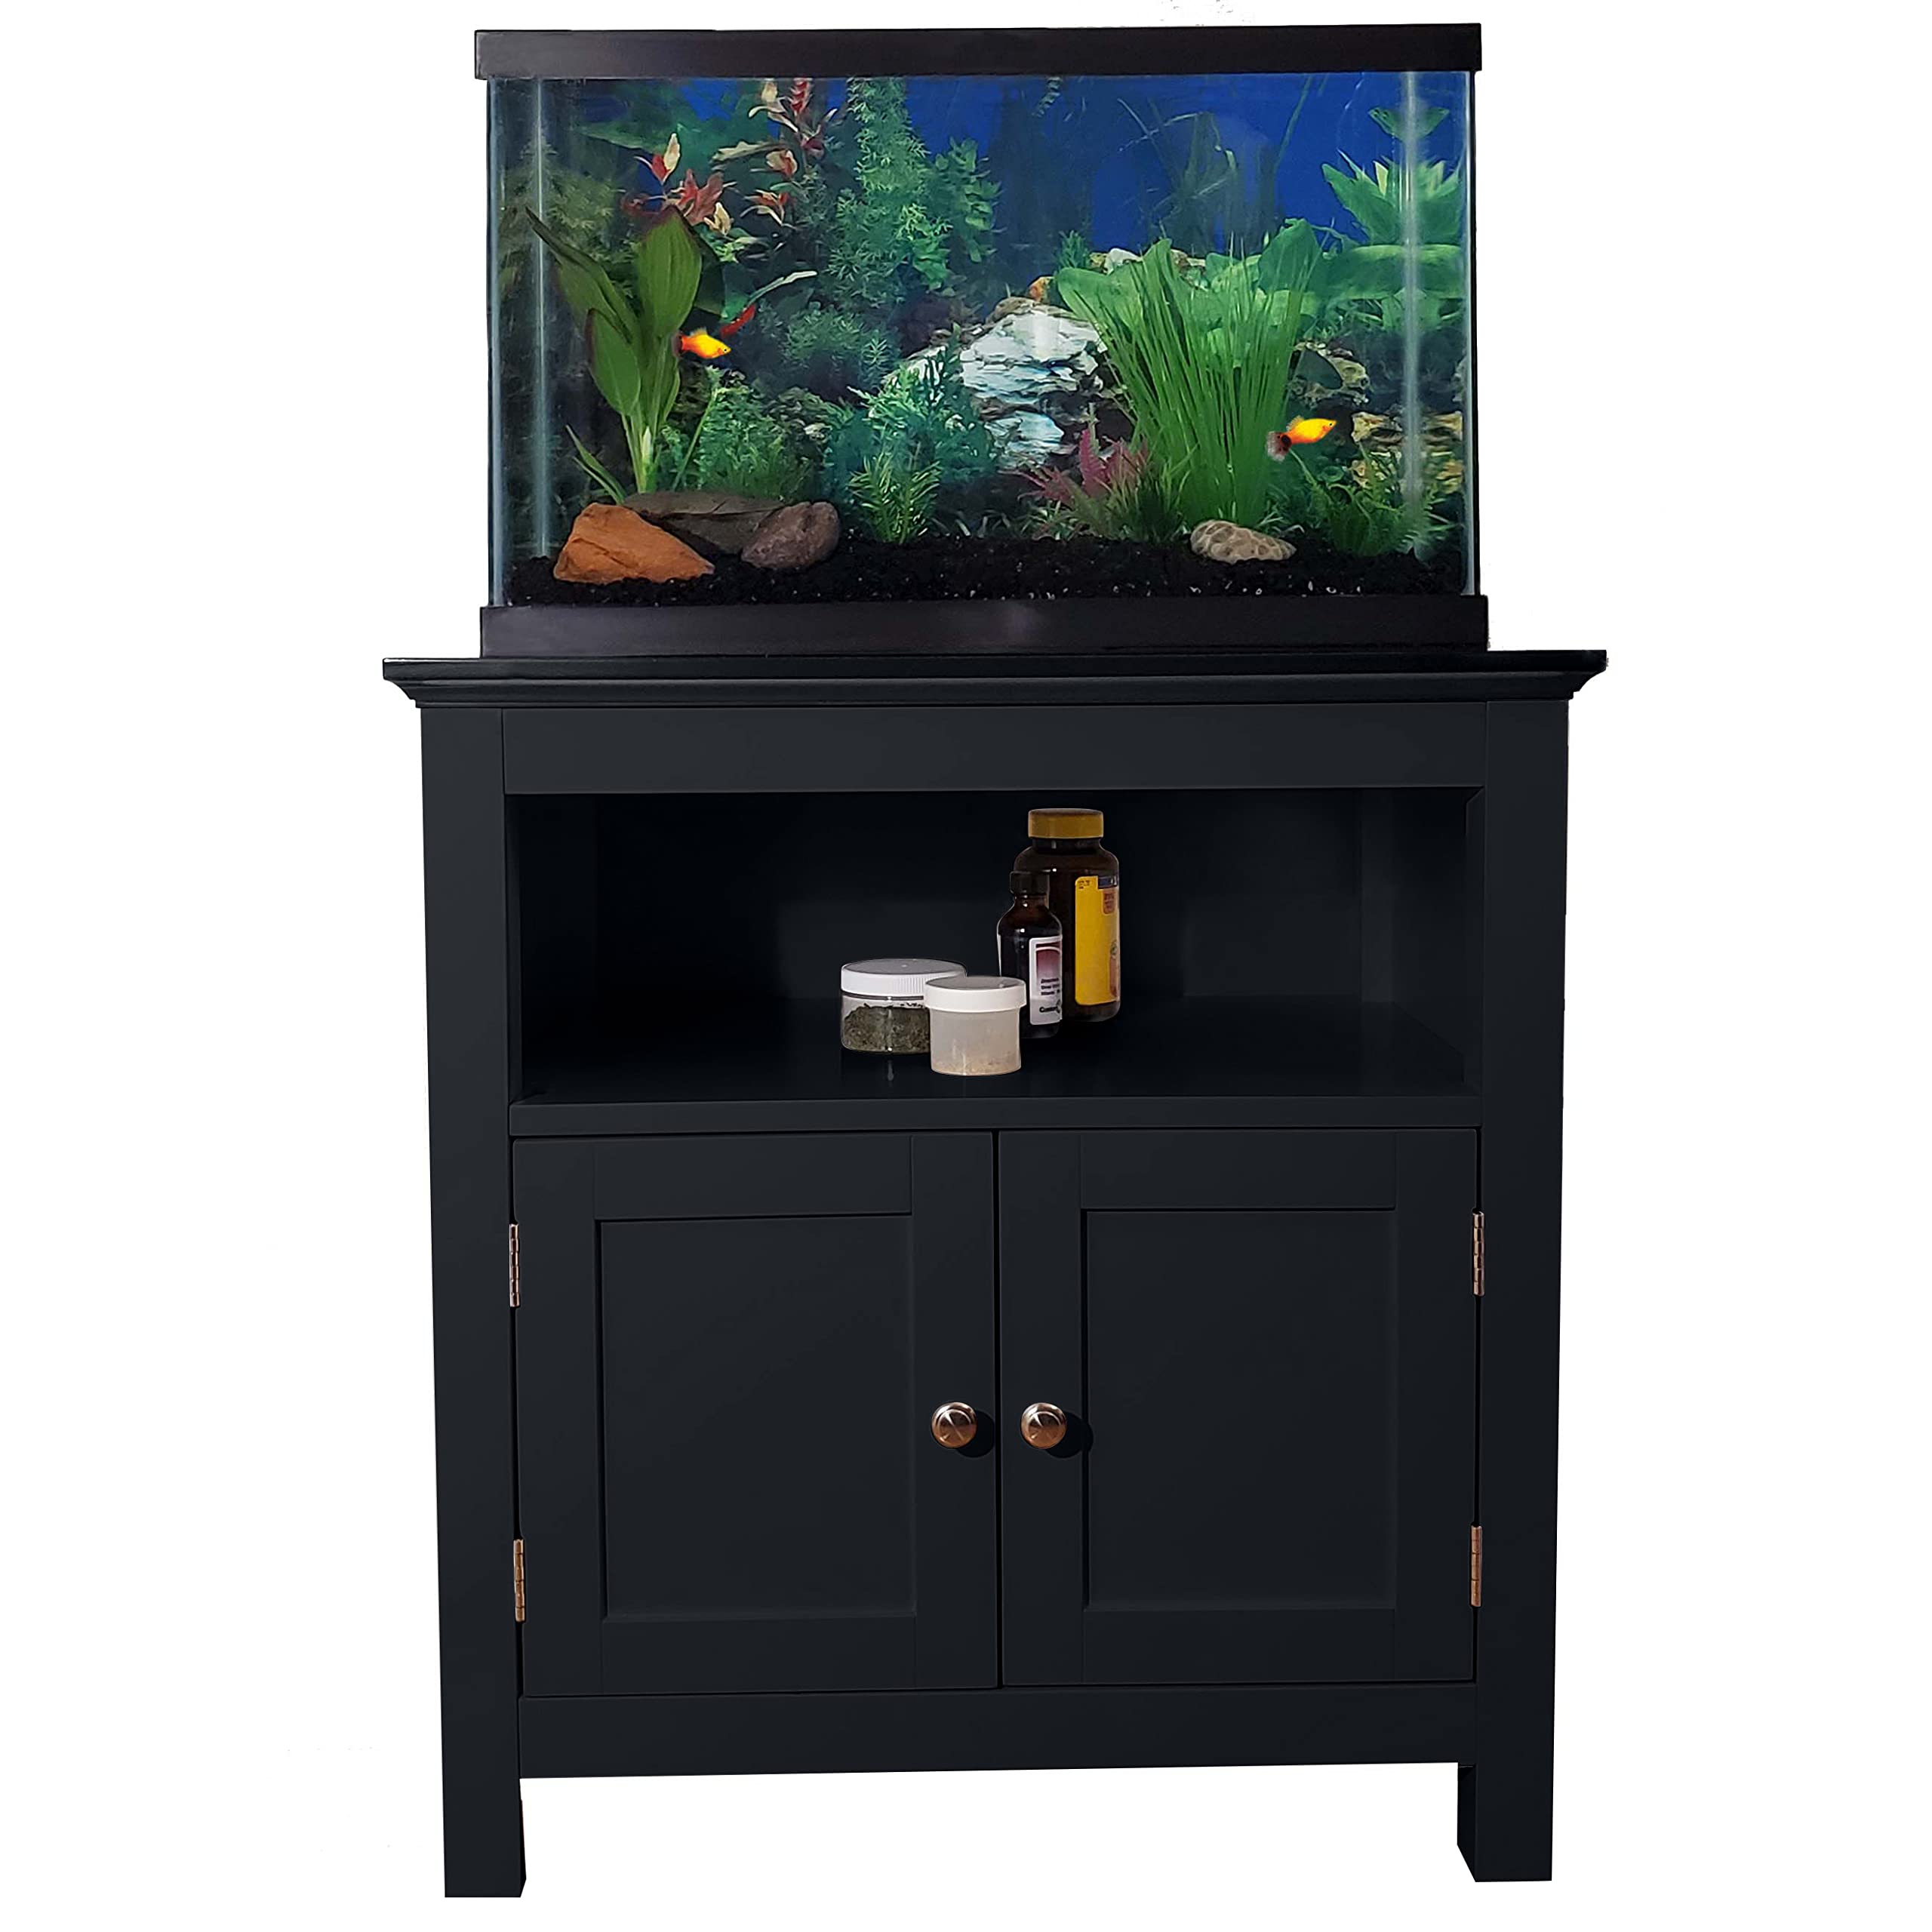 Finomenal Aquarium Stand with Solid Wood Frame and no Flimsy Particle Board. Supports up to 20 gallon Aquarium Stand. great for 